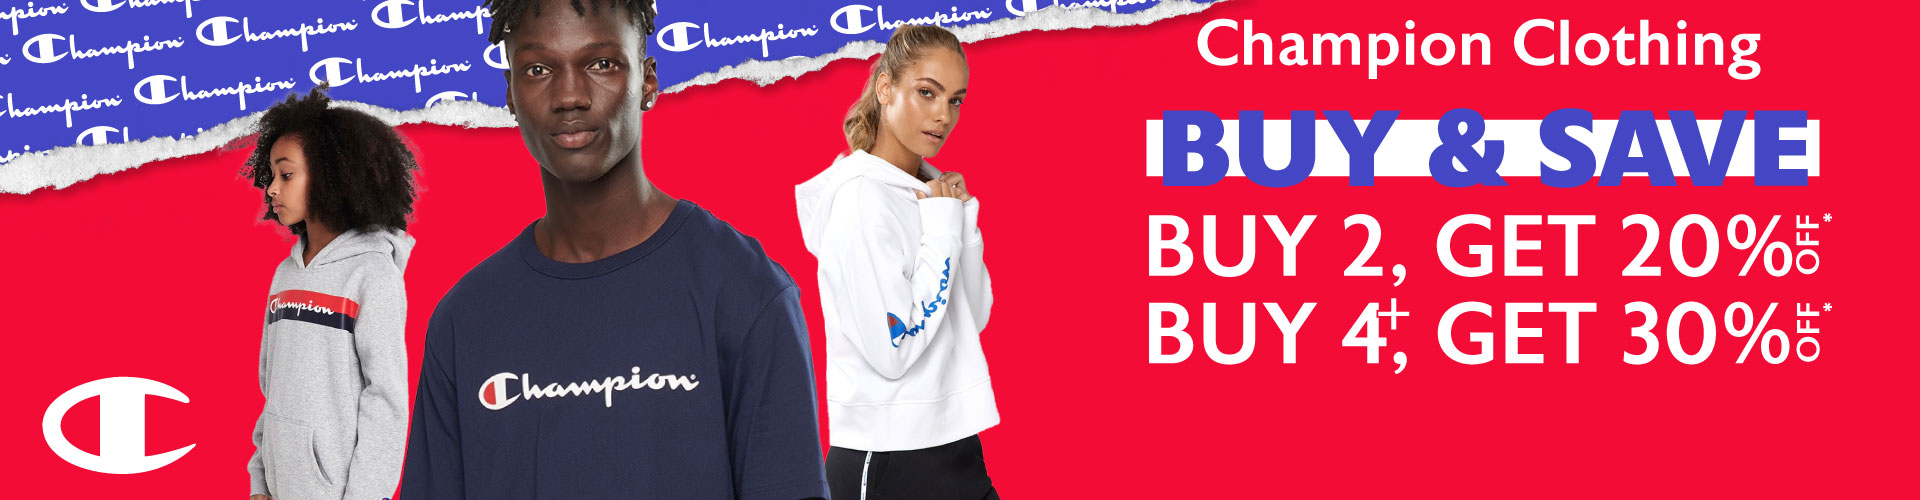 Spend & save - up to 30% OFF on Champion clothing